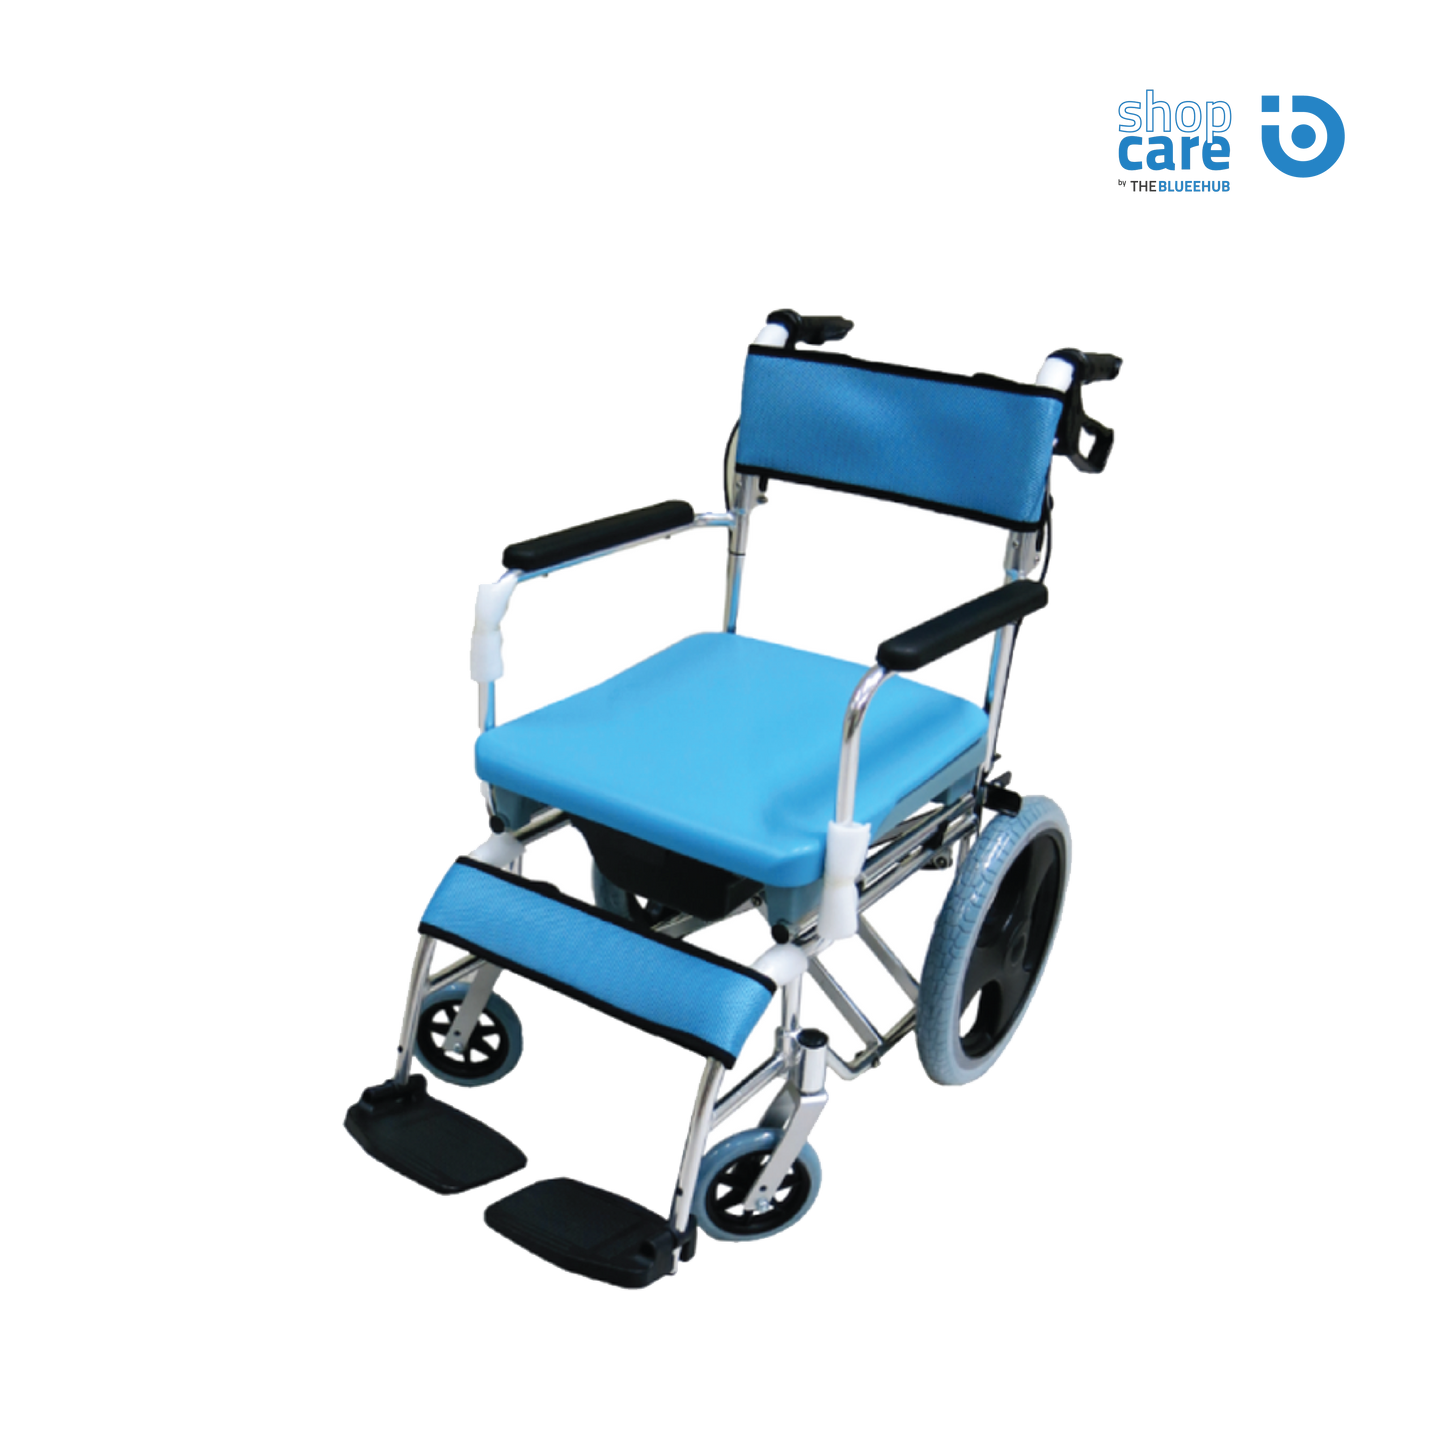 [BUNDLE DEALS] 3-IN-1 COMMODE SHOWER WHEELCHAIR WITH SEAT CUSHION